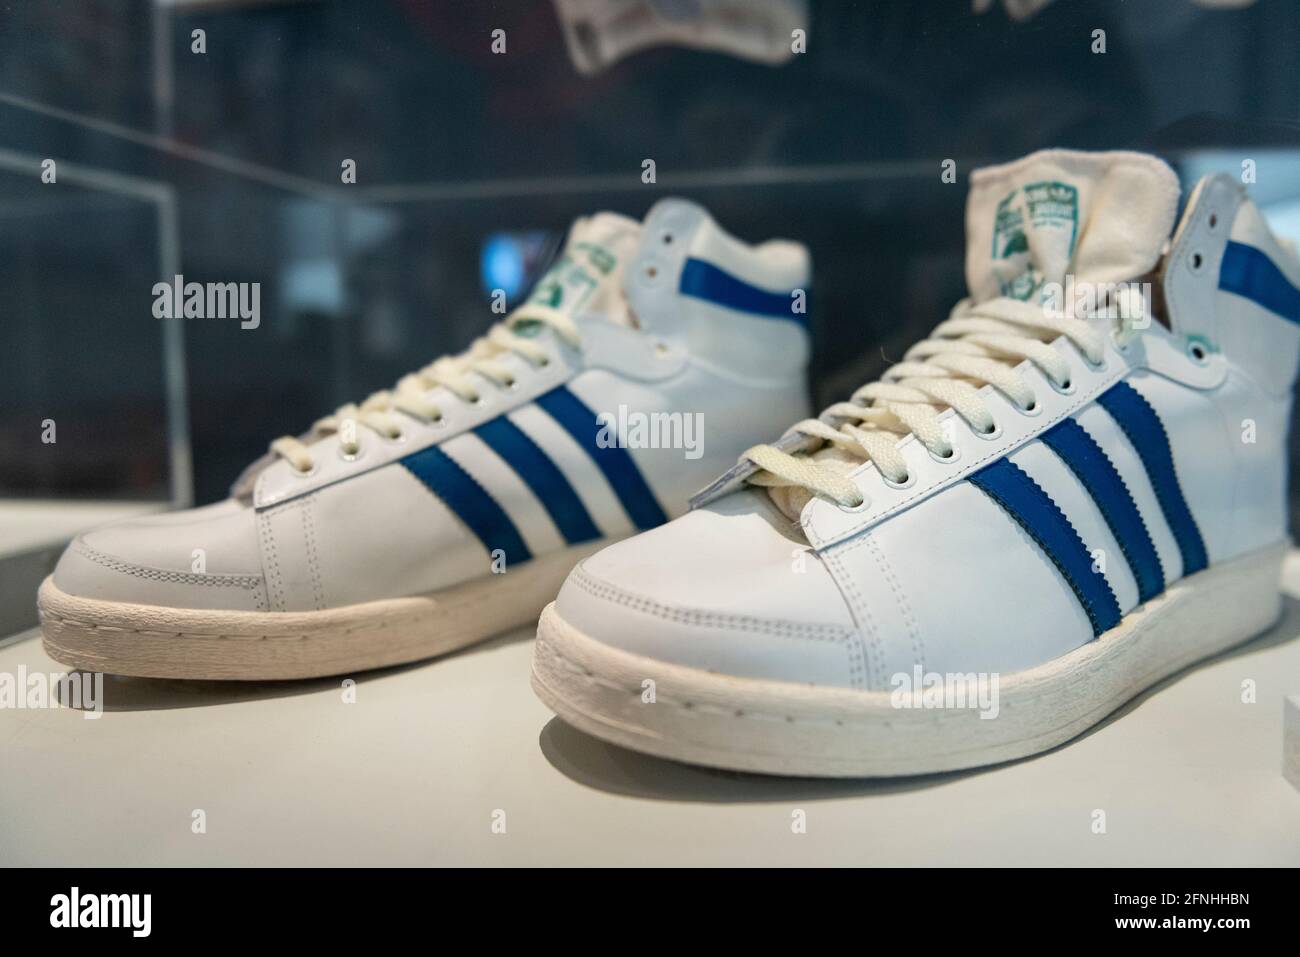 London, UK. 17 May 2021. "Adidas Jabbar", 1980s, first released in 1977,  and worn by NBA legend Kareem Abdul Jabbar. Preview of “Sneakers Unboxed:  Studio to Street” at the Design Museum in